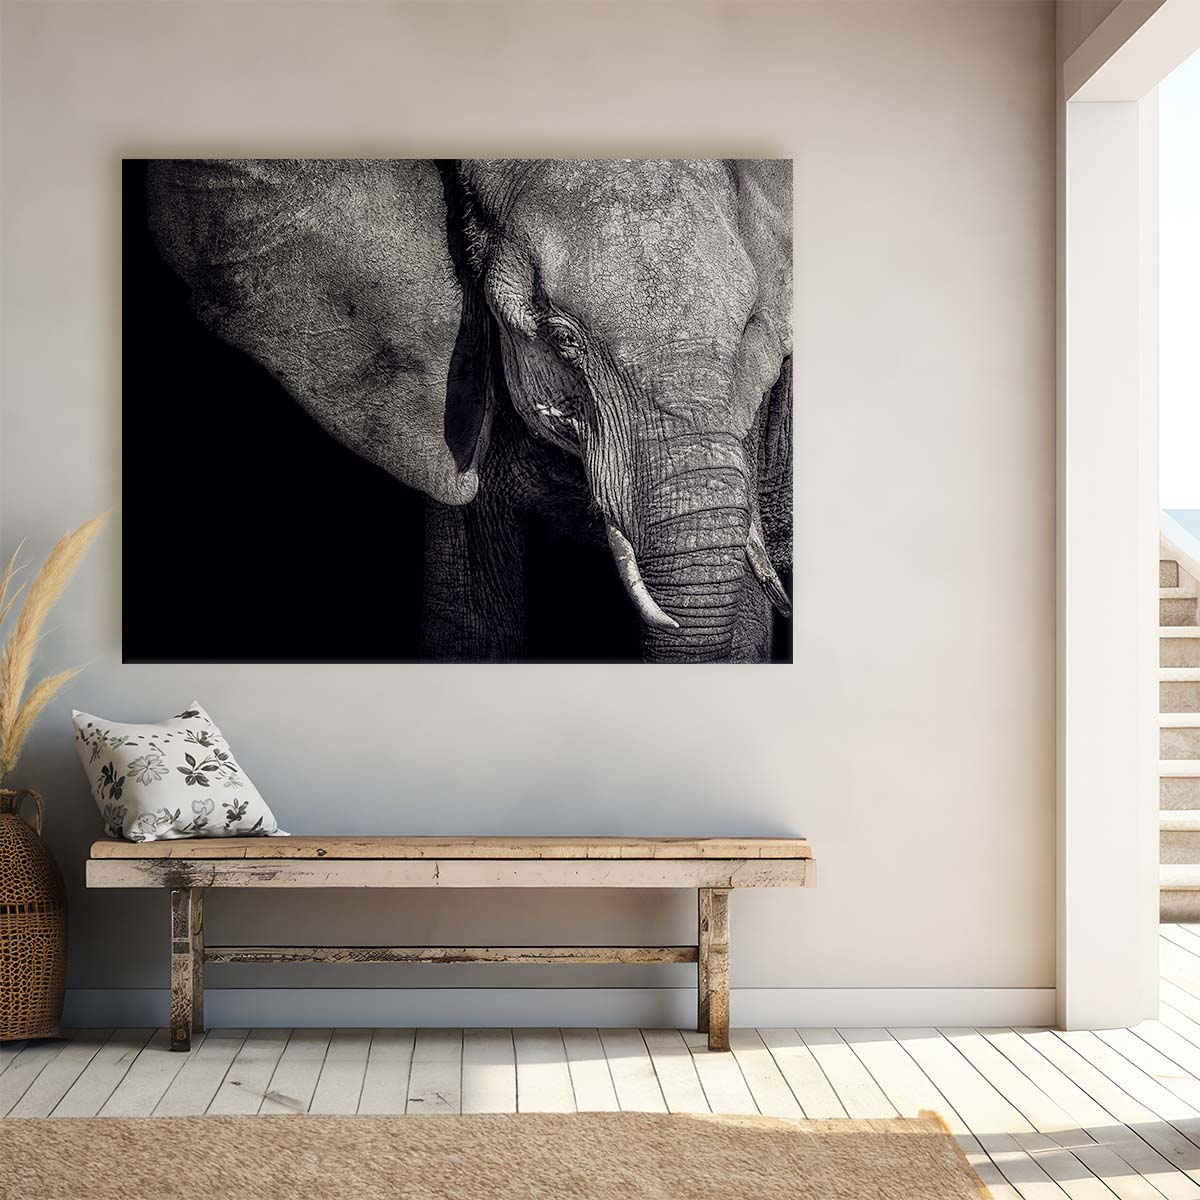 Monochrome African Elephant Matriarch Wall Art by Luxuriance Designs. Made in USA.